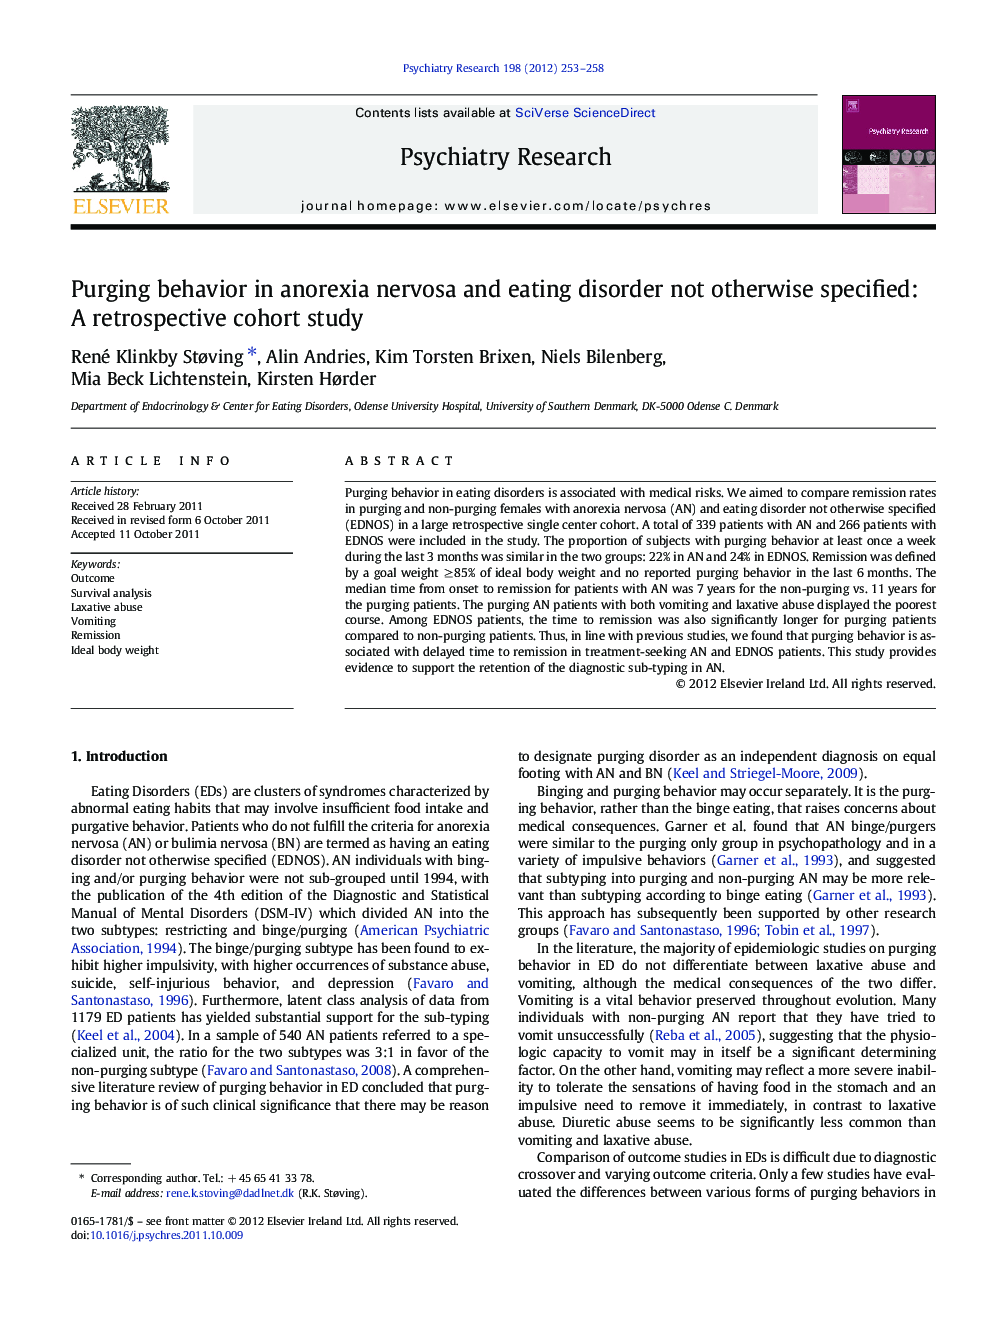 Purging behavior in anorexia nervosa and eating disorder not otherwise specified: A retrospective cohort study